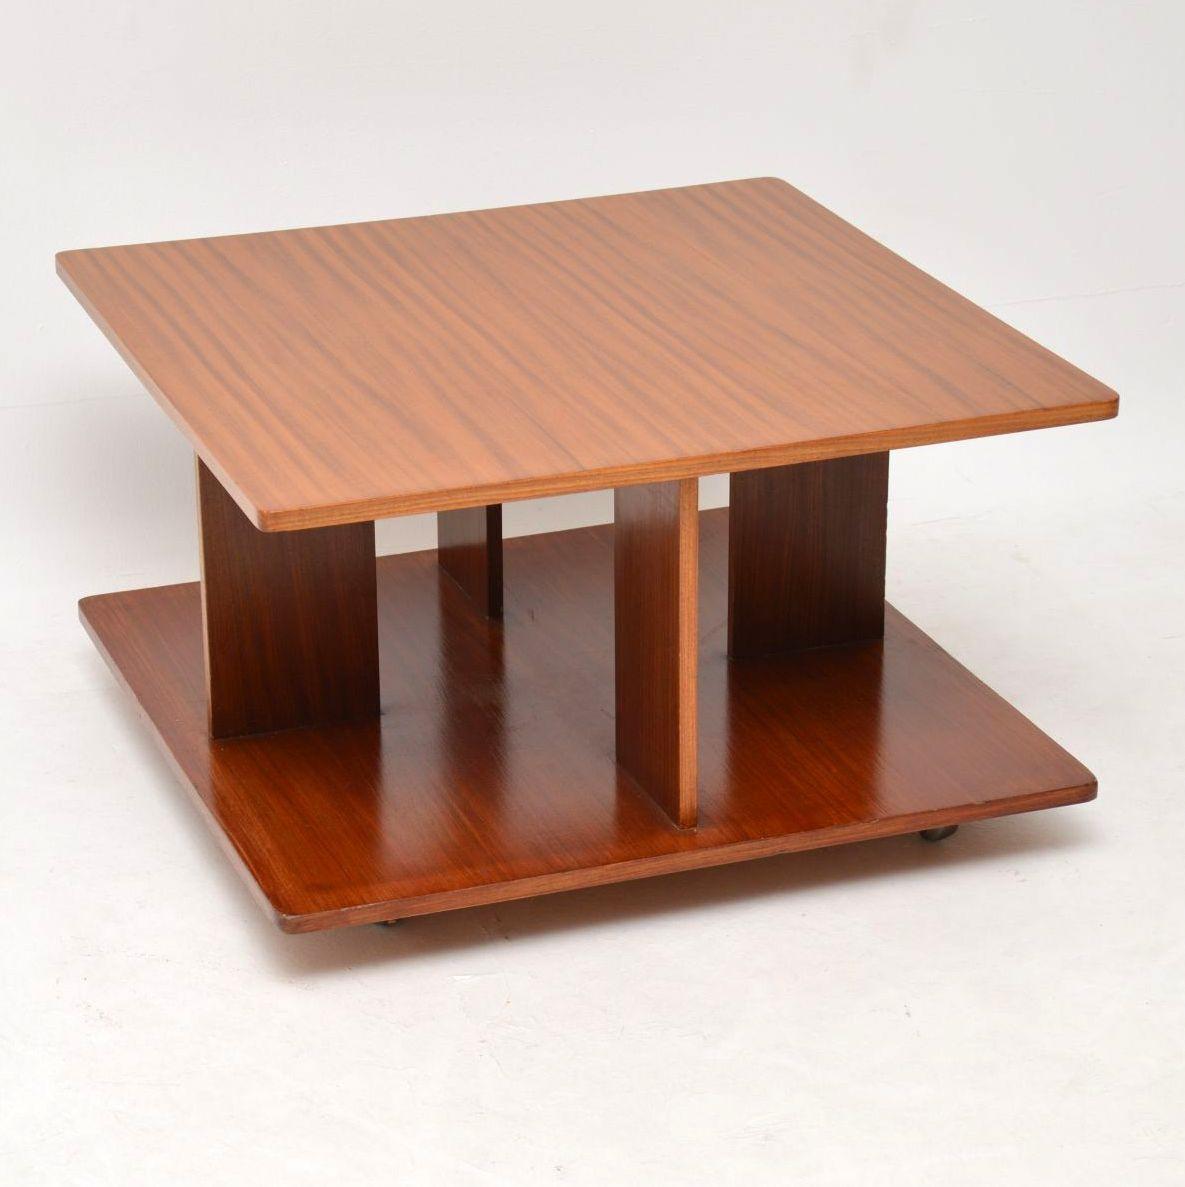 A beautifully designed and very rare vintage teak coffee table with four matching stools that tuck underneath the top. This dates from the 1960s and is in superb condition for its age. The table is clean, sturdy and sound, with barely any wear to be